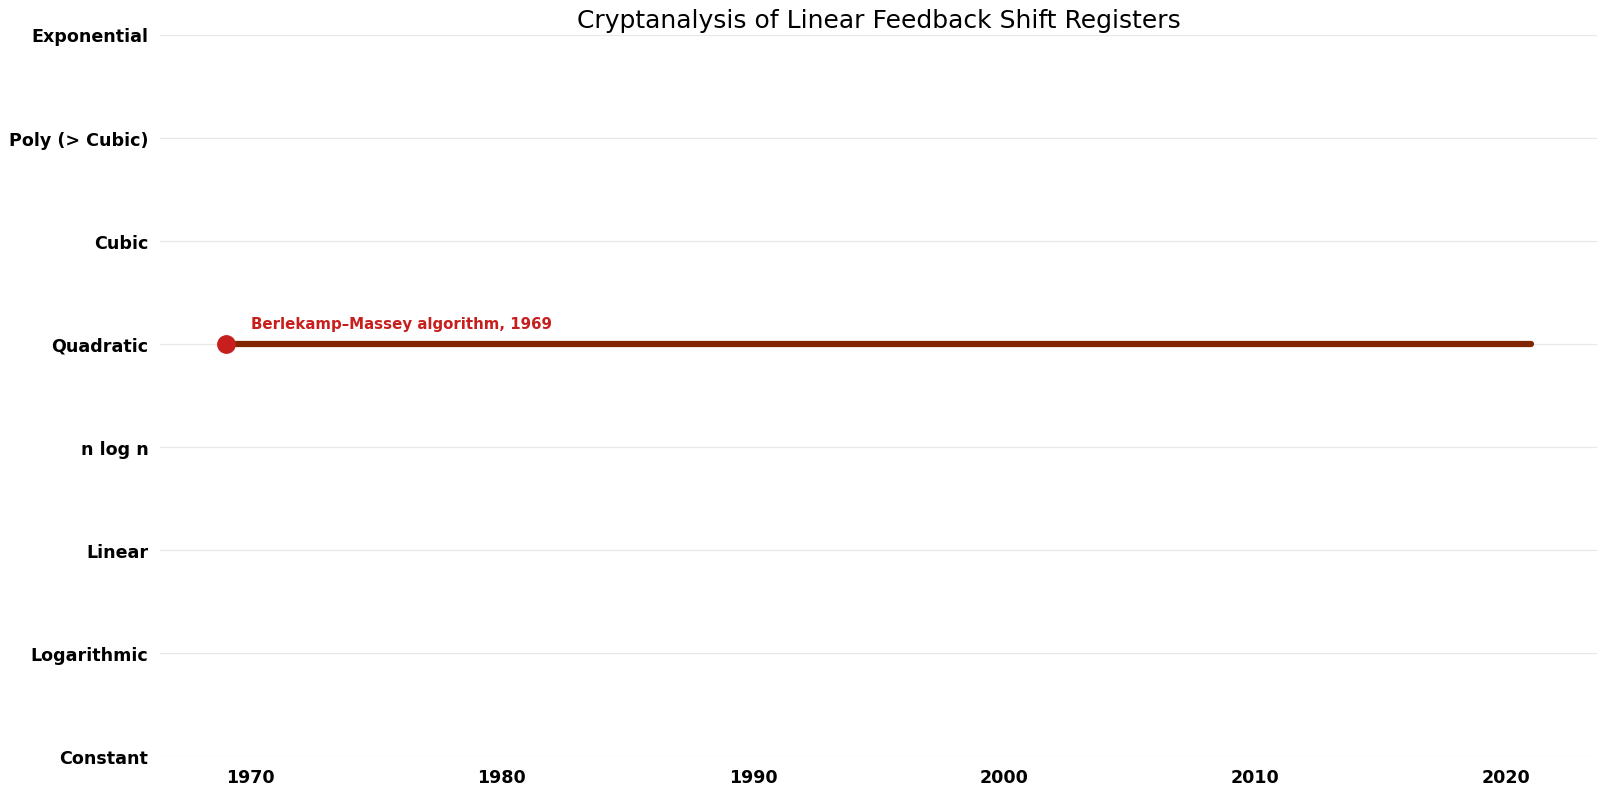 File:Cryptanalysis of Linear Feedback Shift Registers - Time.png